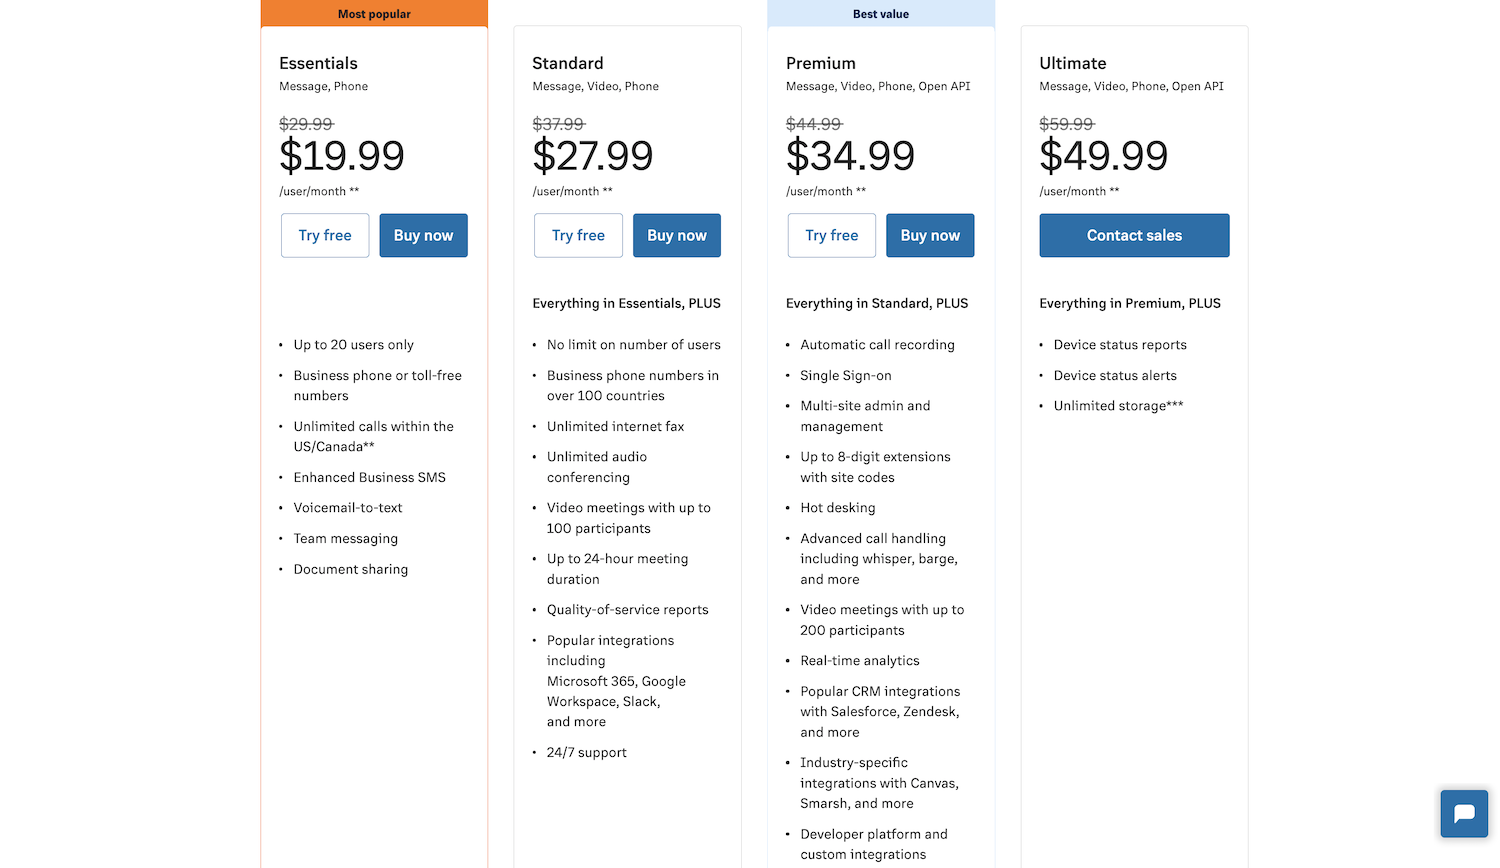 RingCentral Pricing MVP